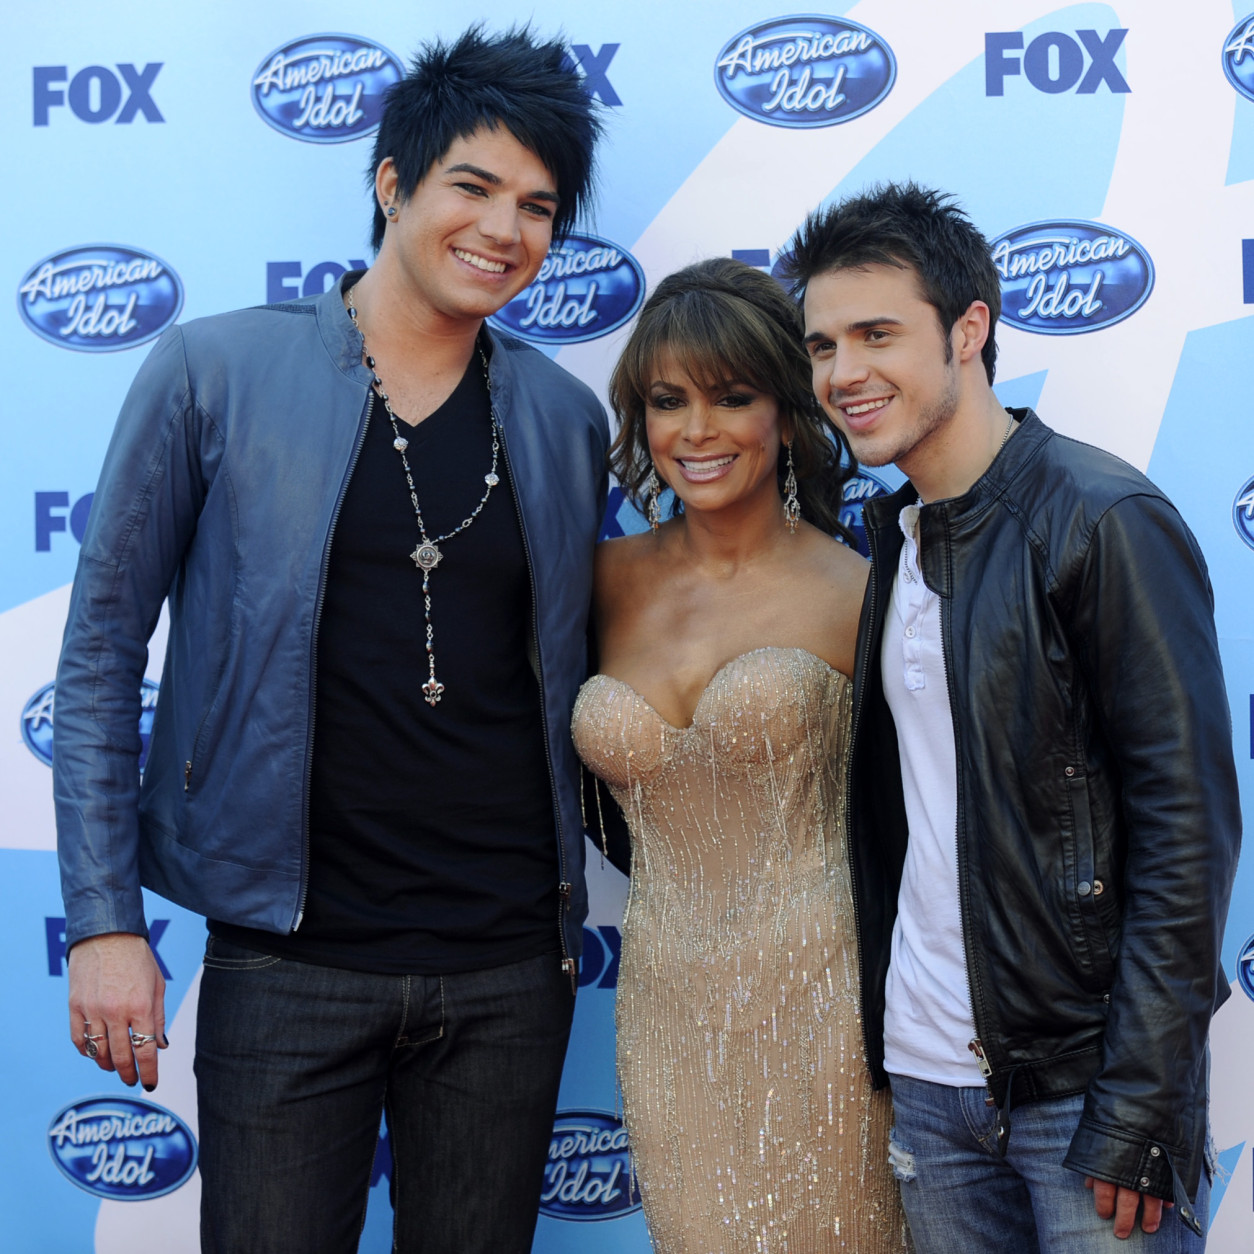 "American Idol" finalists Adam Lambert, left, and Kris Allen, right, pose with judge Paula Abdul before the "American Idol" finale in Los Angeles, Wednesday, May 20, 2009. (AP Photo/Chris Pizzello)